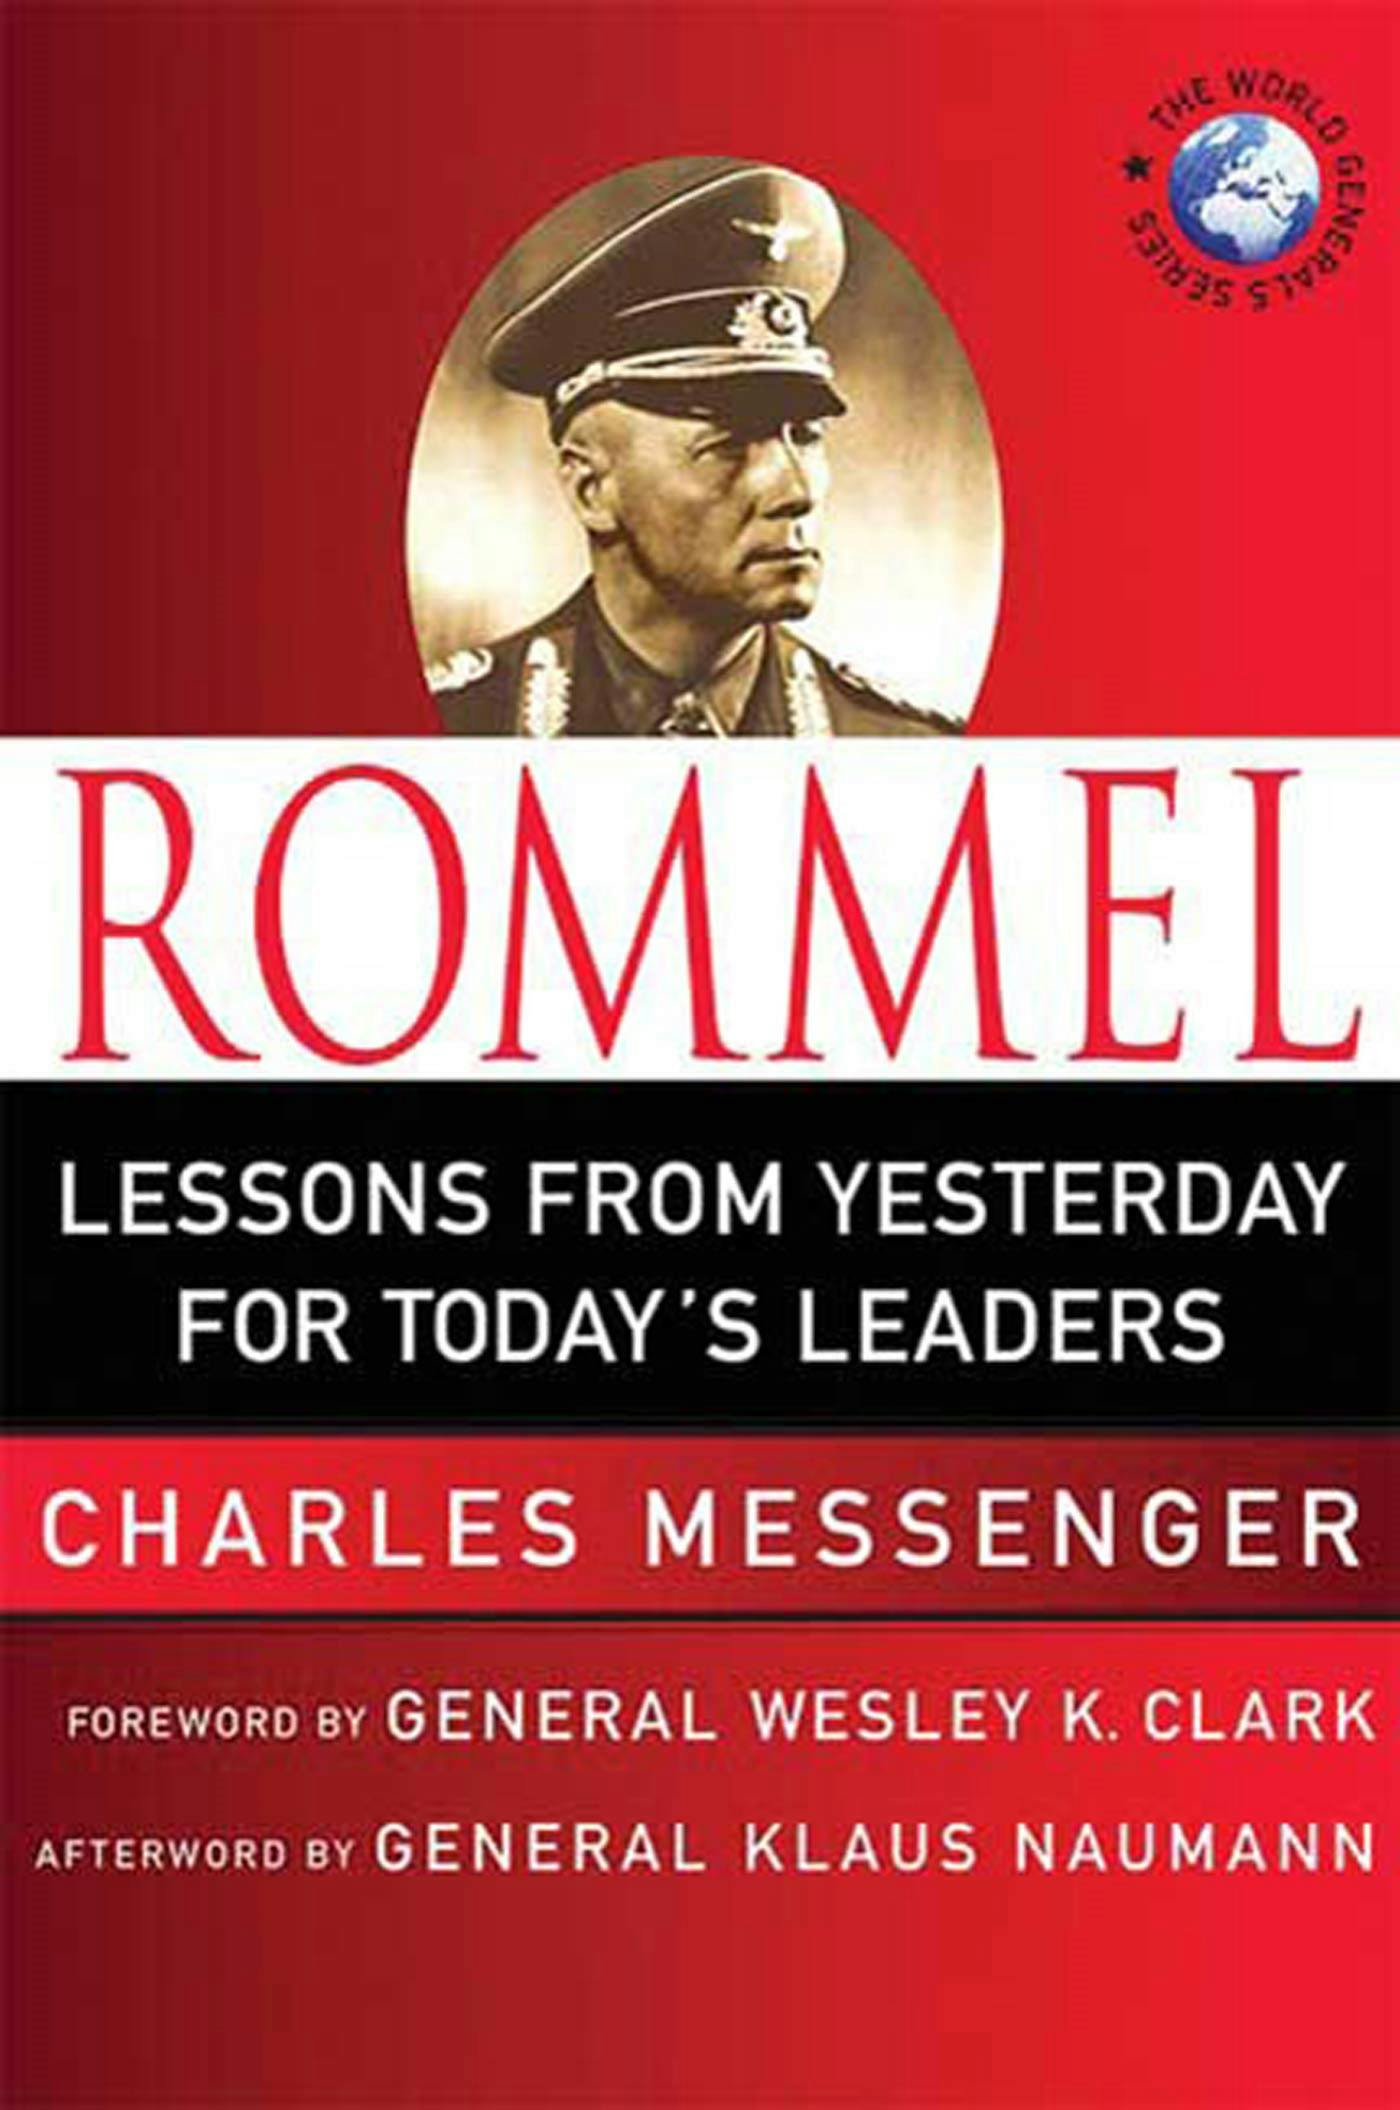 Image of Rommel: Lessons from Yesterday for Today's Leaders